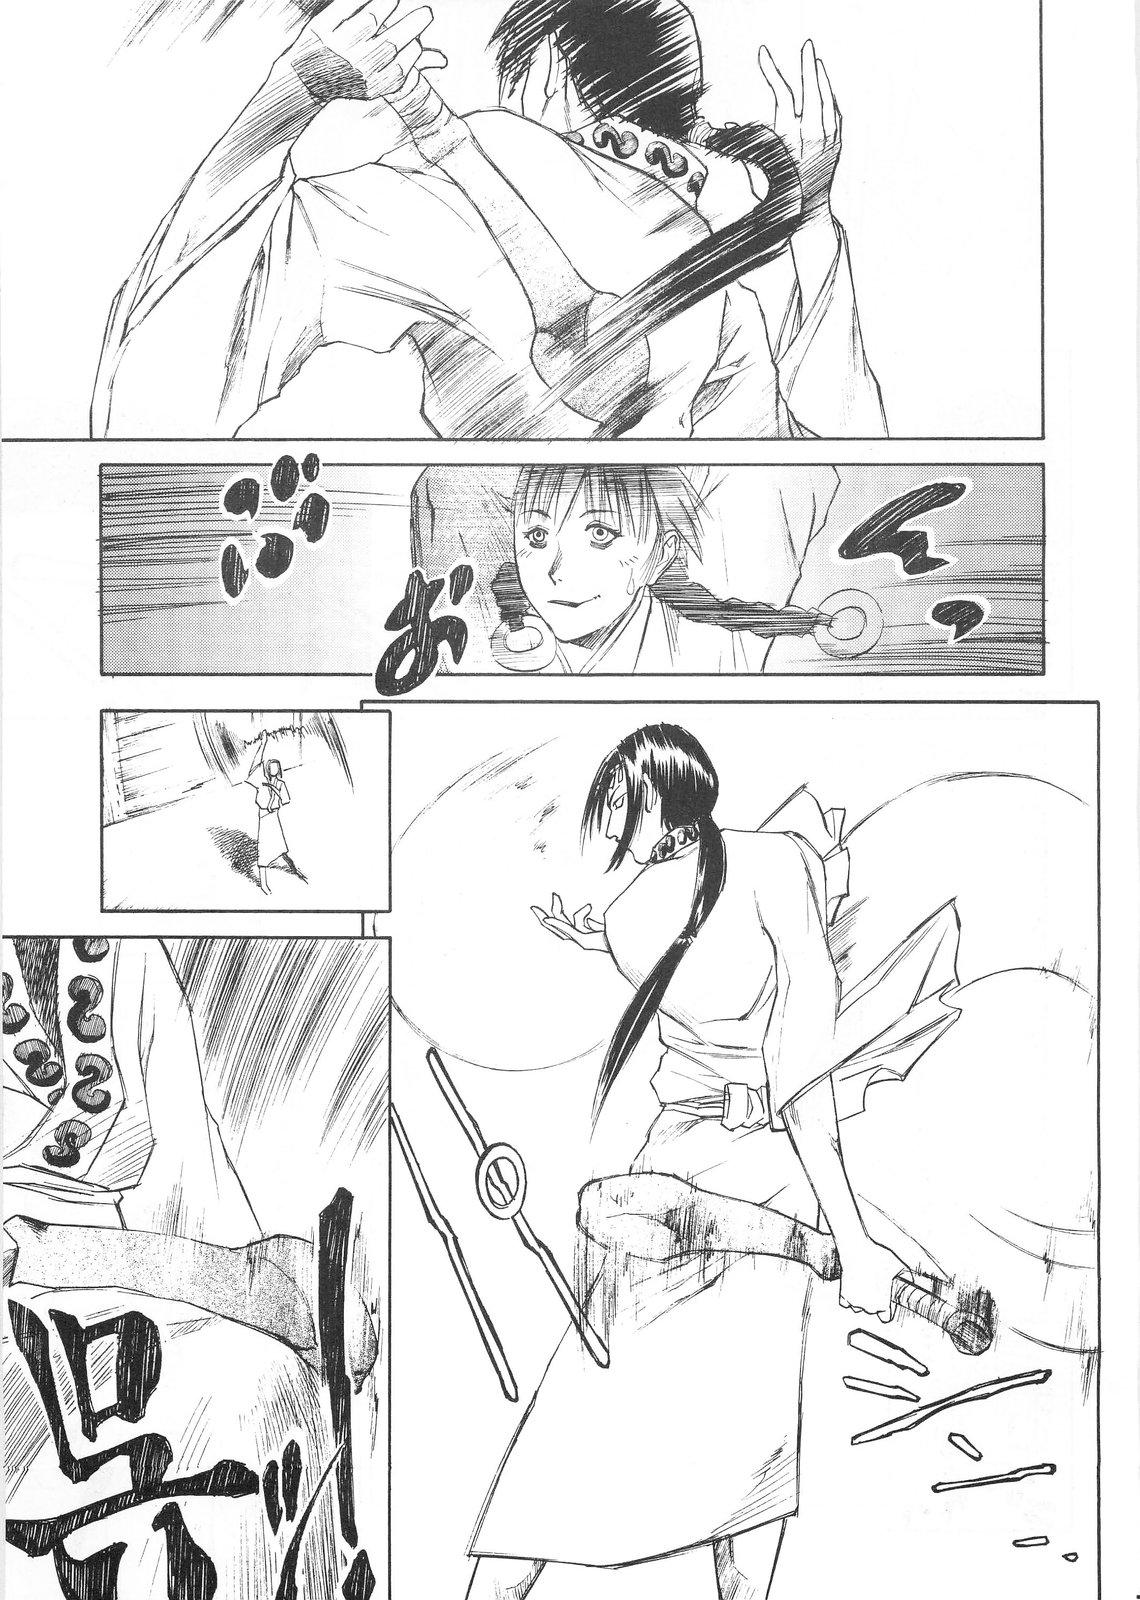 Price Manji - Blade of the immortal Pegging - Page 7